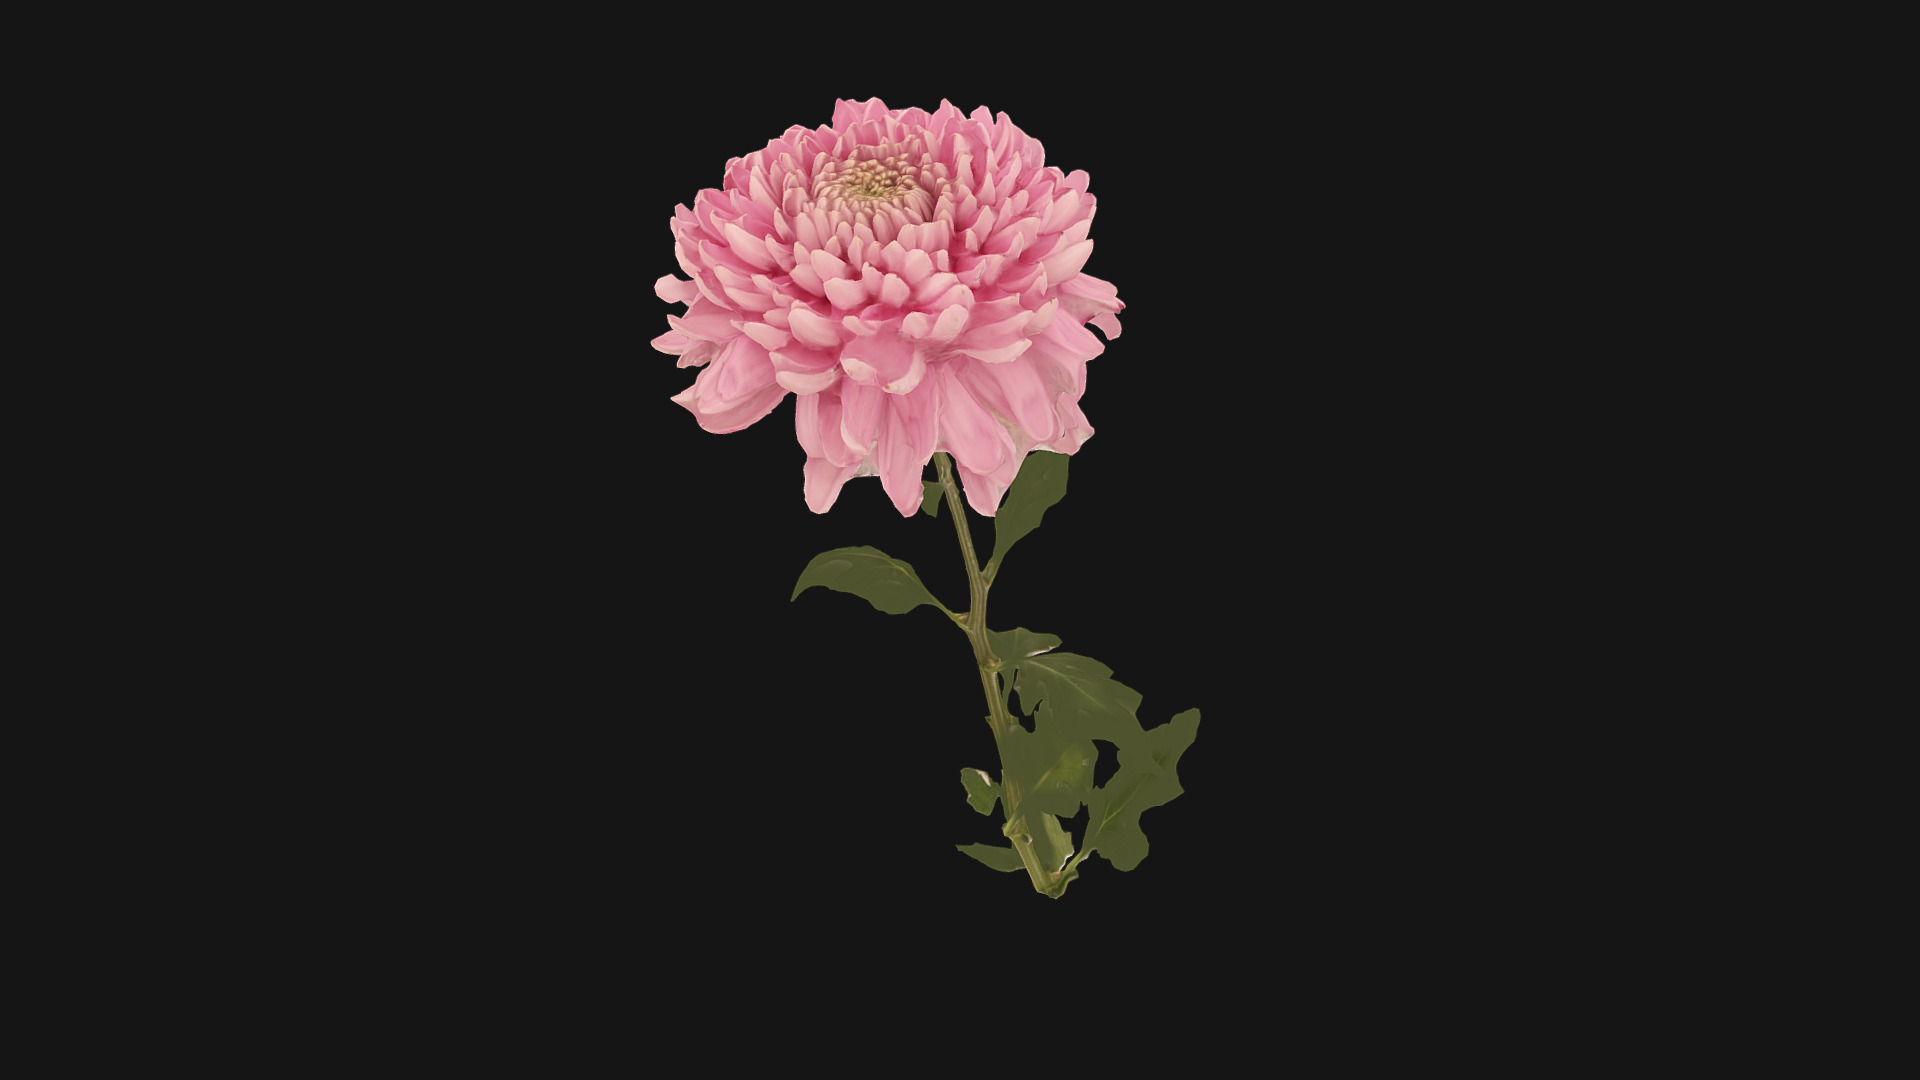 3D model Fw22 – Pink Flower - This is a 3D model of the Fw22 - Pink Flower. The 3D model is about a pink flower with green leaves.